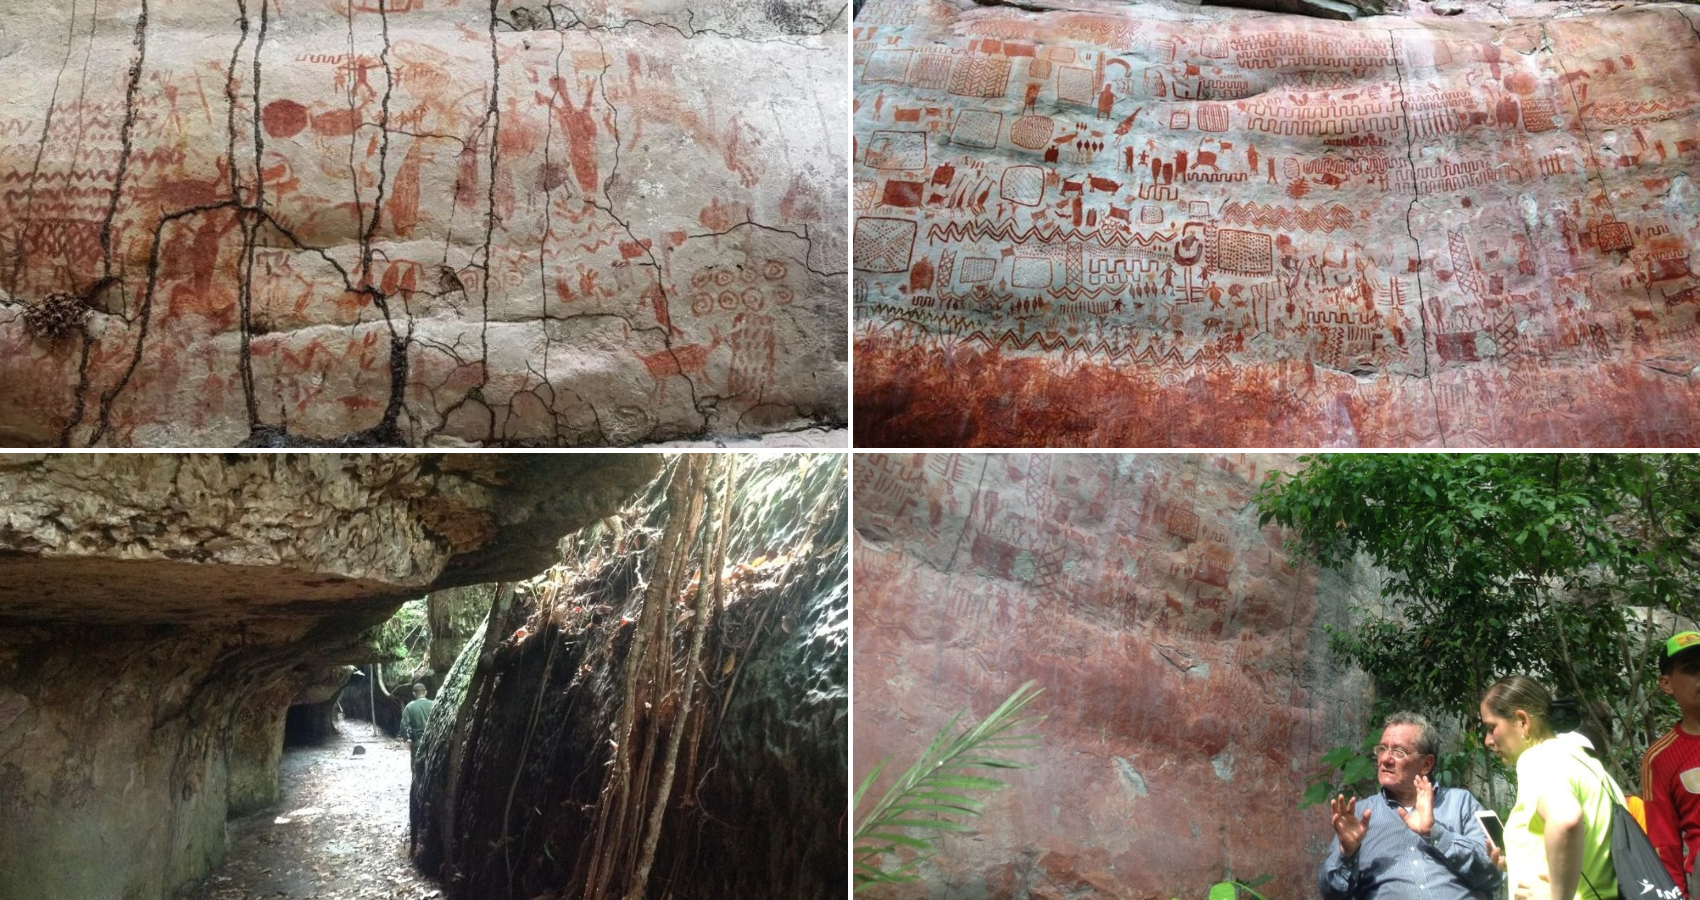 Archeologists Discover “Sistine Chapel of the Ancients” With Thousands of Ice Age Rock Paintings